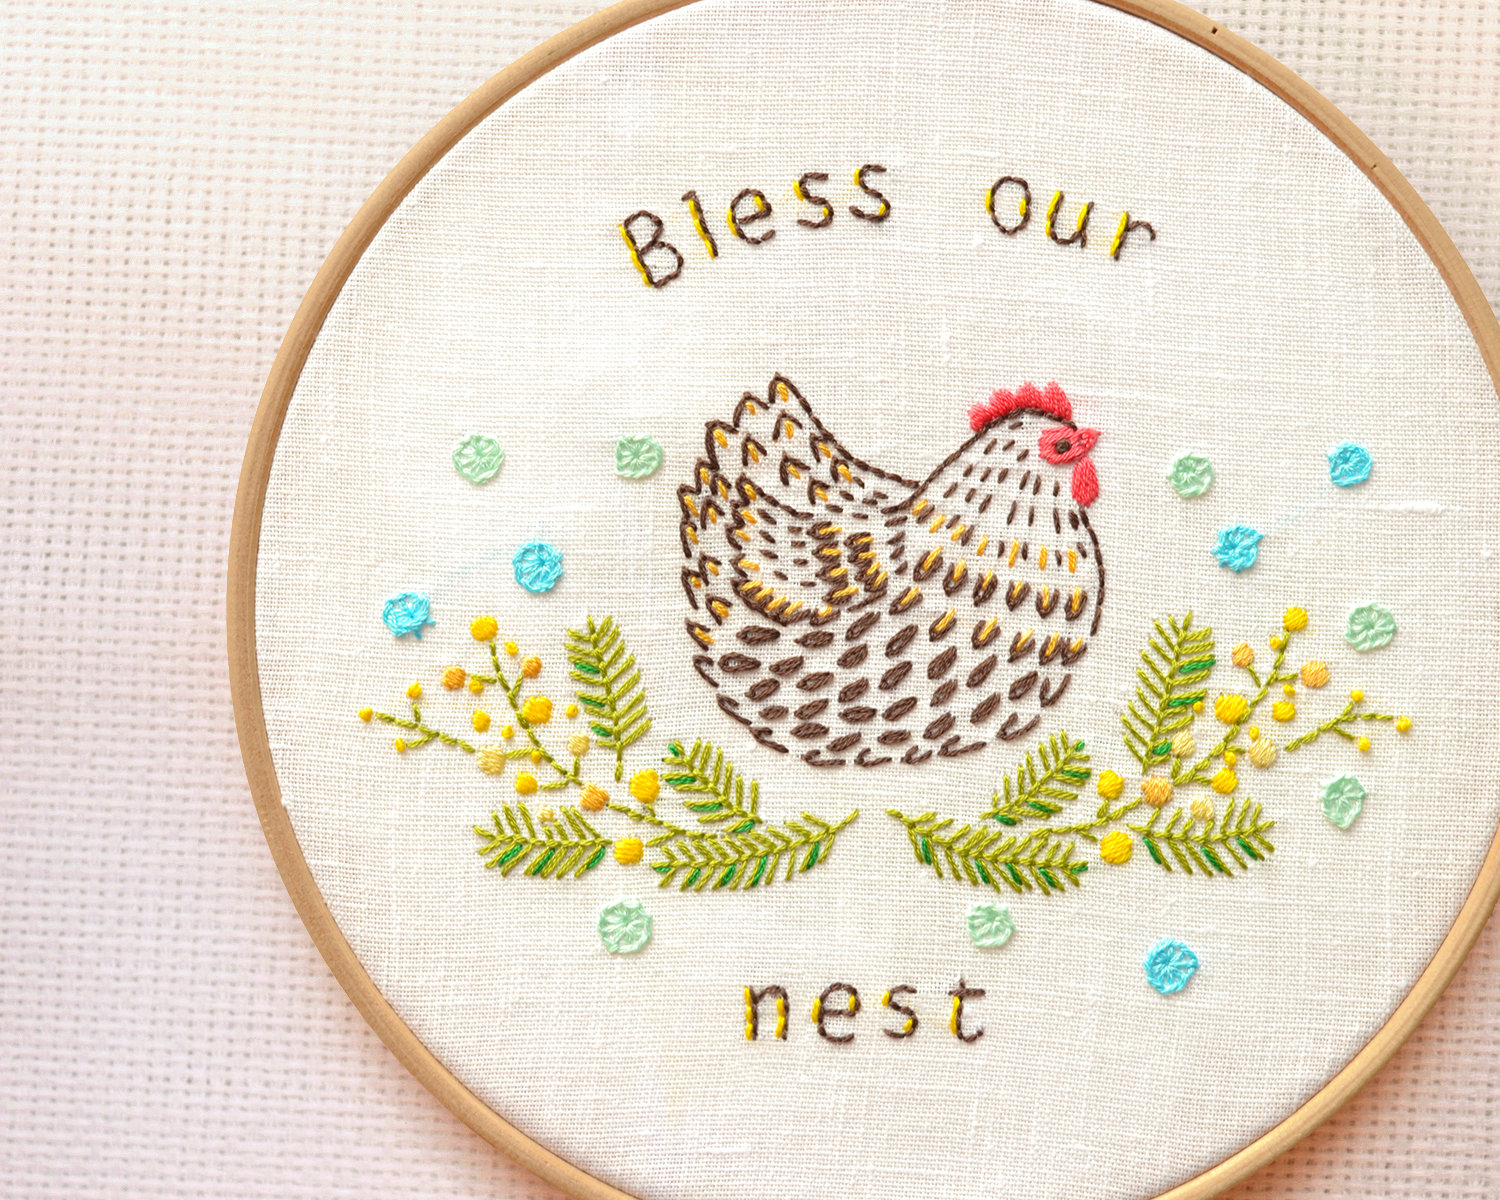 Hand Embroidery Patterns Hand Embroidery Patterns Pdf Chicken Decor Bless Our Nest Easter Embroidery Family Simbol Naiveneedle